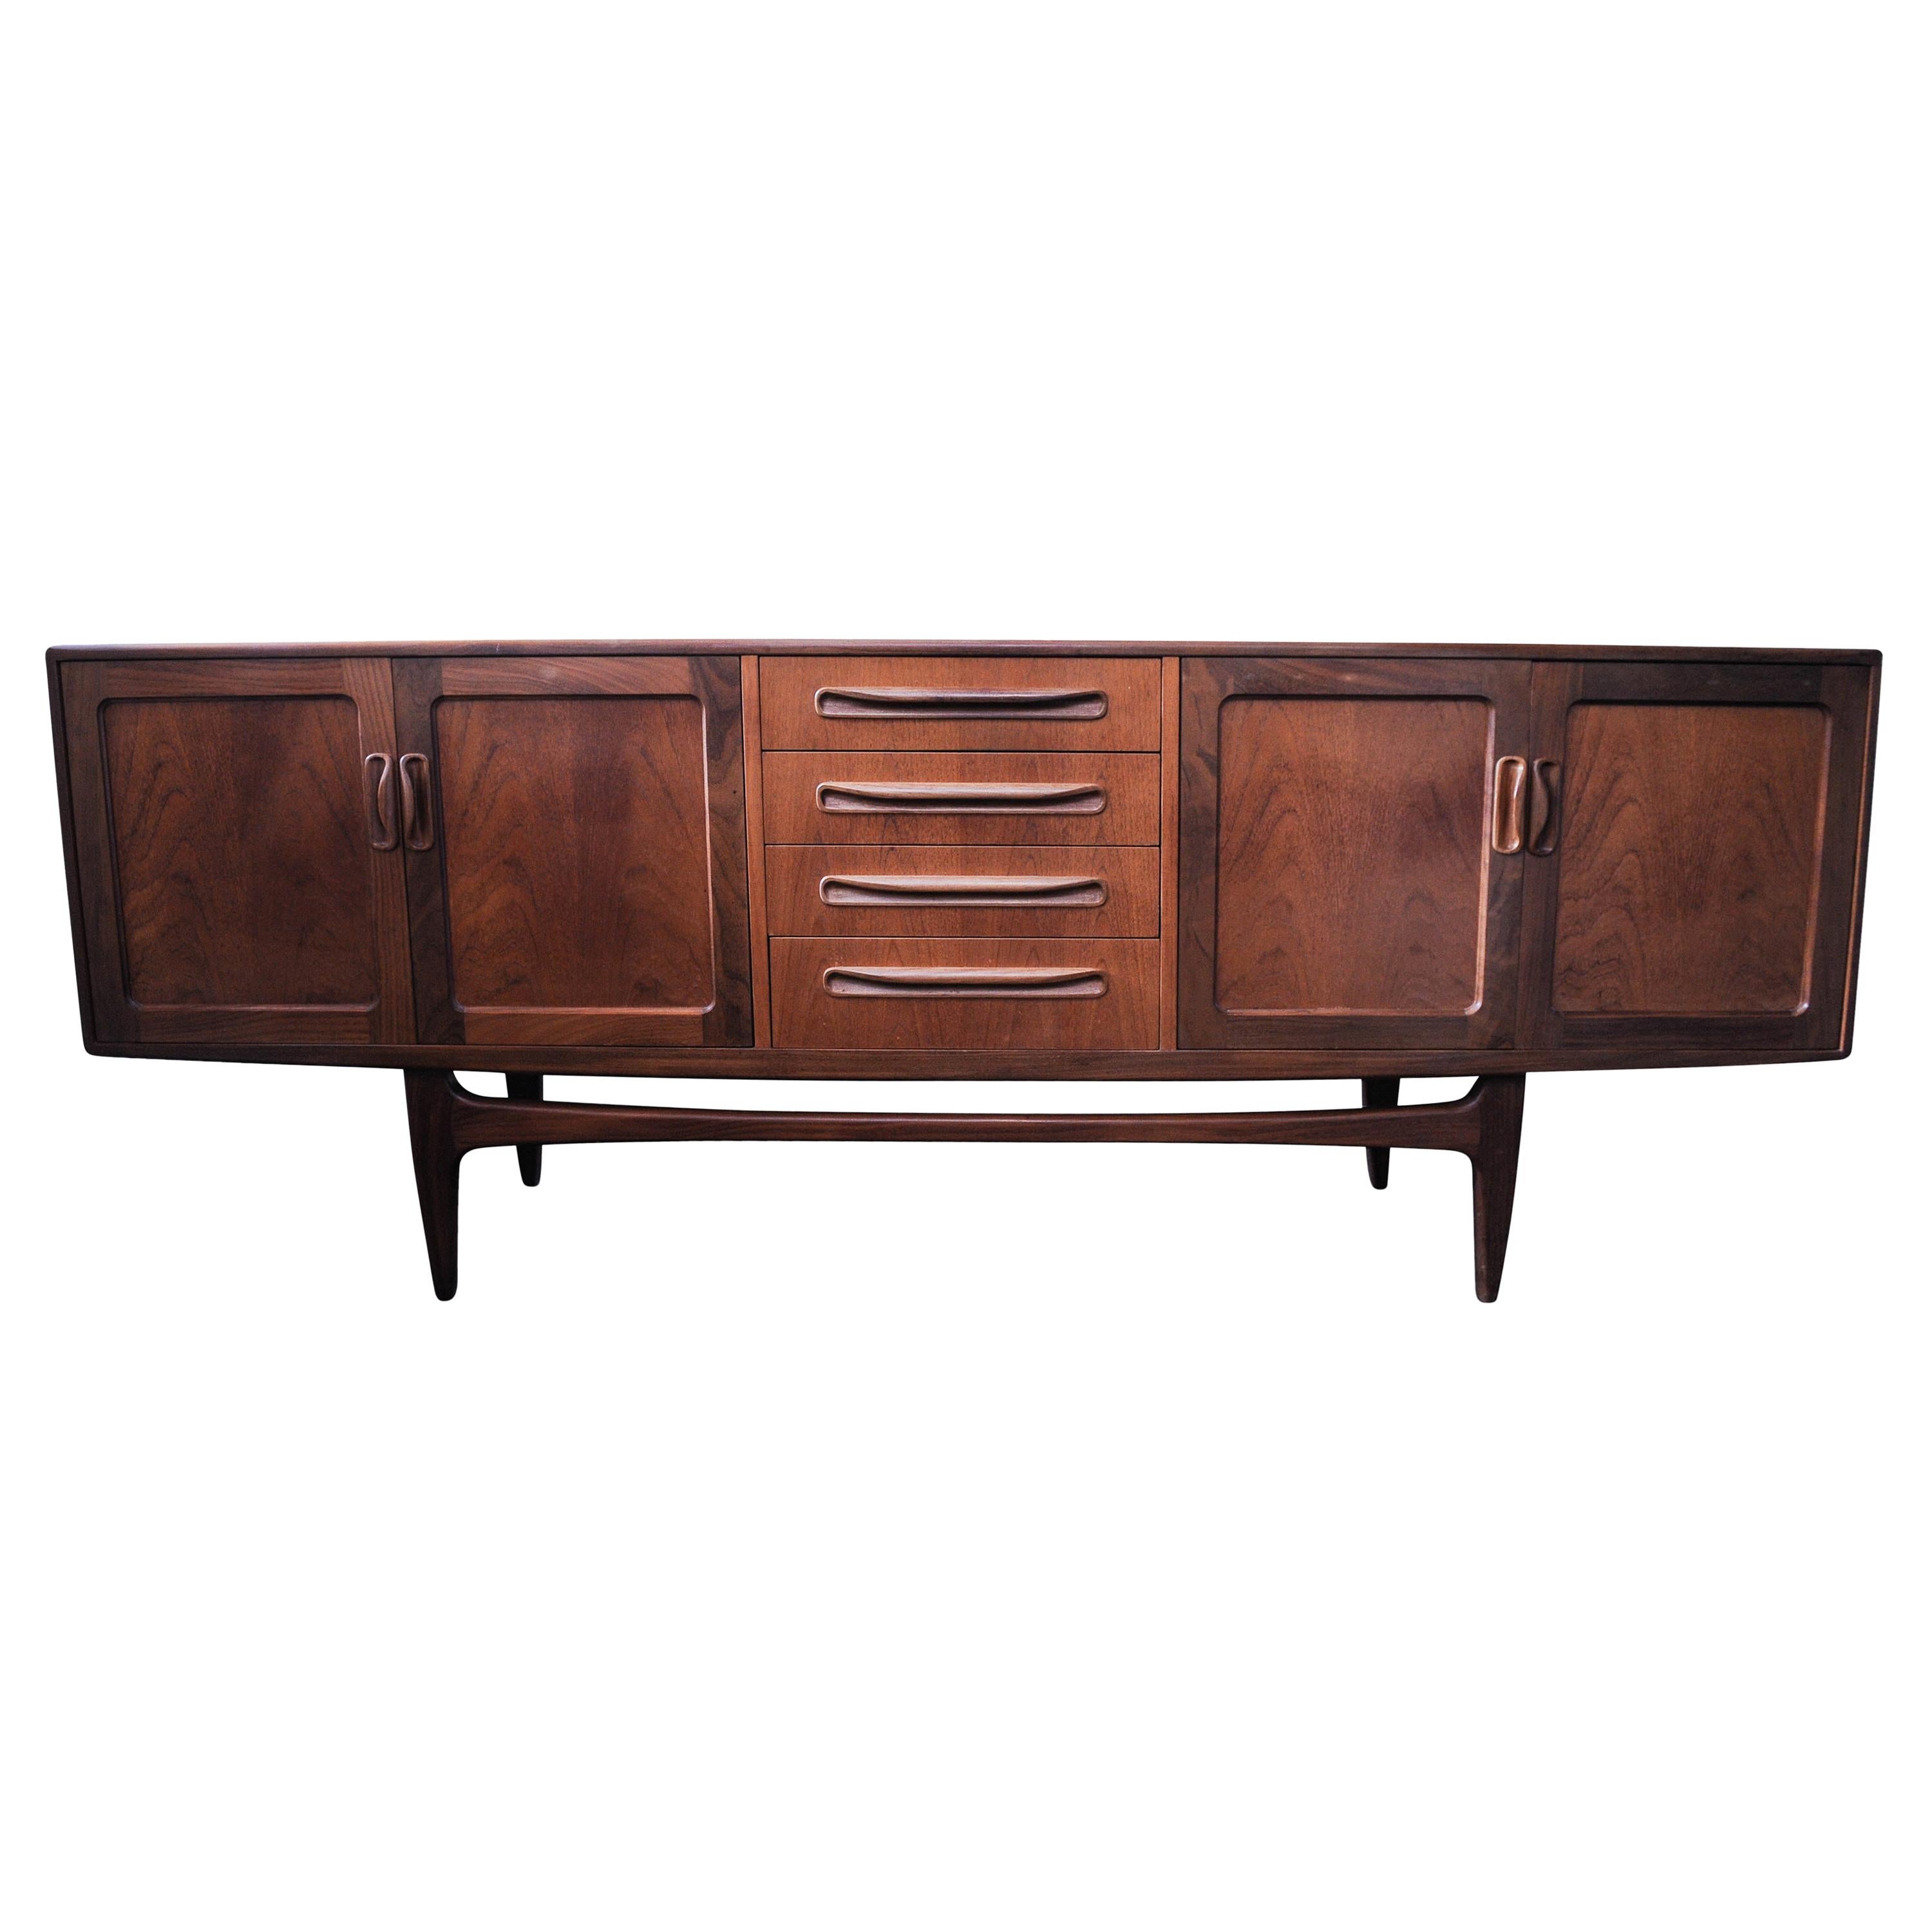 Ib Kofod-Larsen Danish midcentury teak sideboard or credenza for G Plan 1950s.
Storage space includes 2 side cupboards and 4 drawers.
Item is in great condition for the age of the piece with hardly any wear or tear.

G PLAN red label to inside